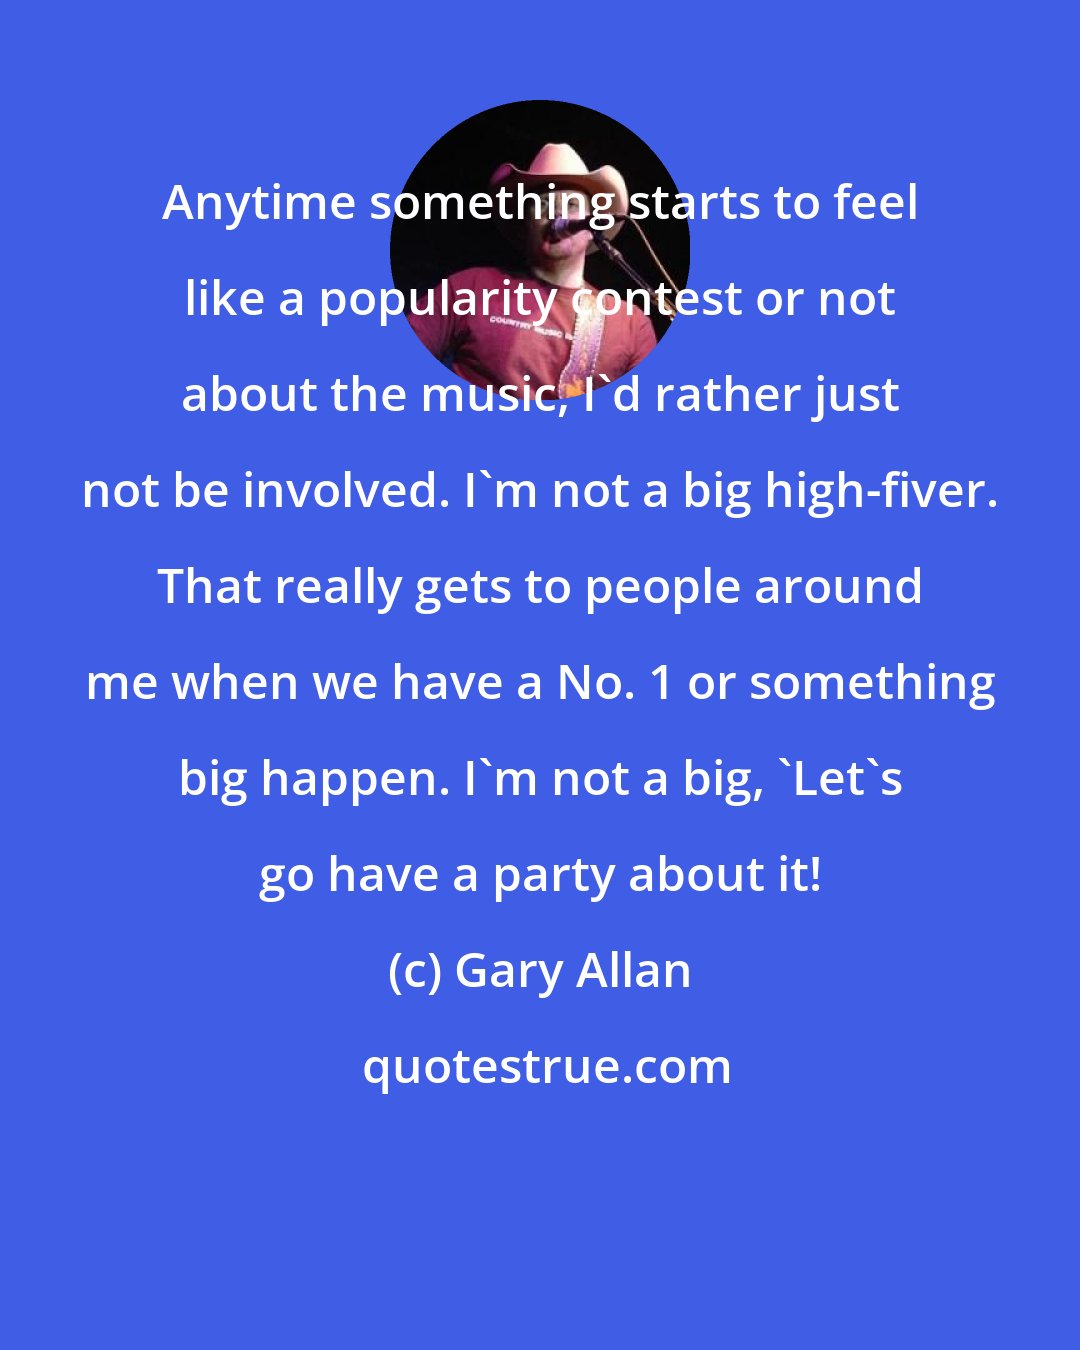 Gary Allan: Anytime something starts to feel like a popularity contest or not about the music, I'd rather just not be involved. I'm not a big high-fiver. That really gets to people around me when we have a No. 1 or something big happen. I'm not a big, 'Let's go have a party about it!